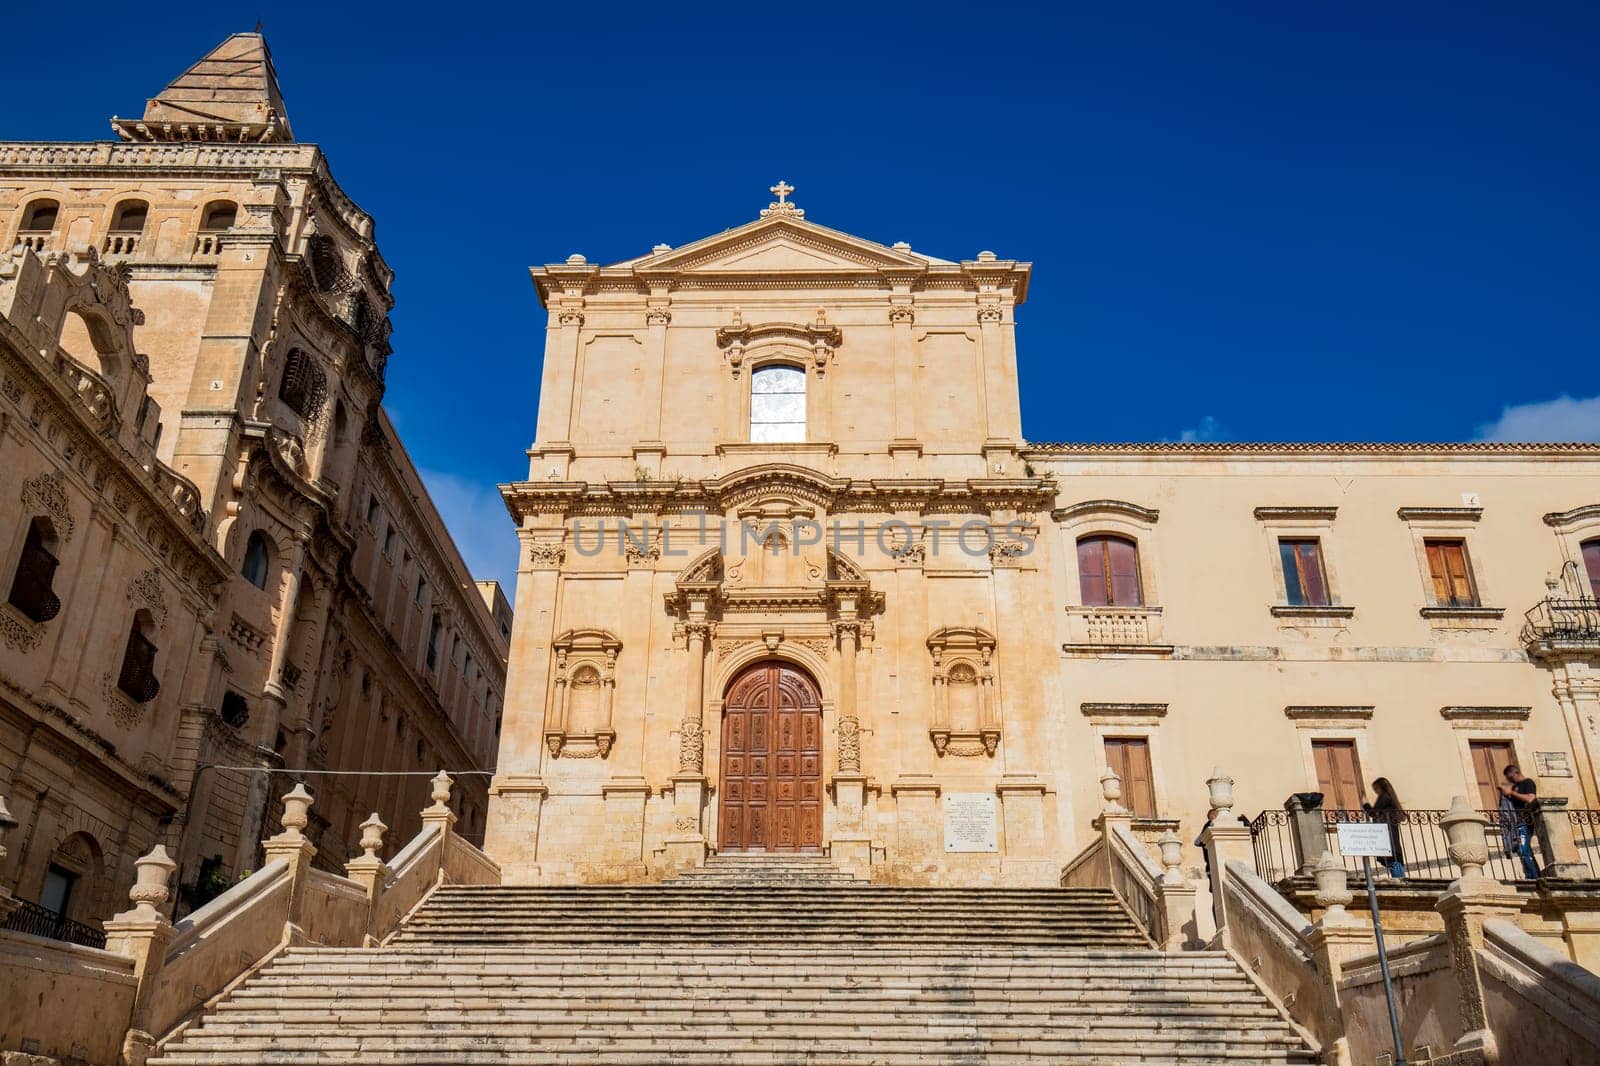 Church of Saint Francis of Assisi, iconic building in the historical center of Noto, picturesque town in Sicily, Italy